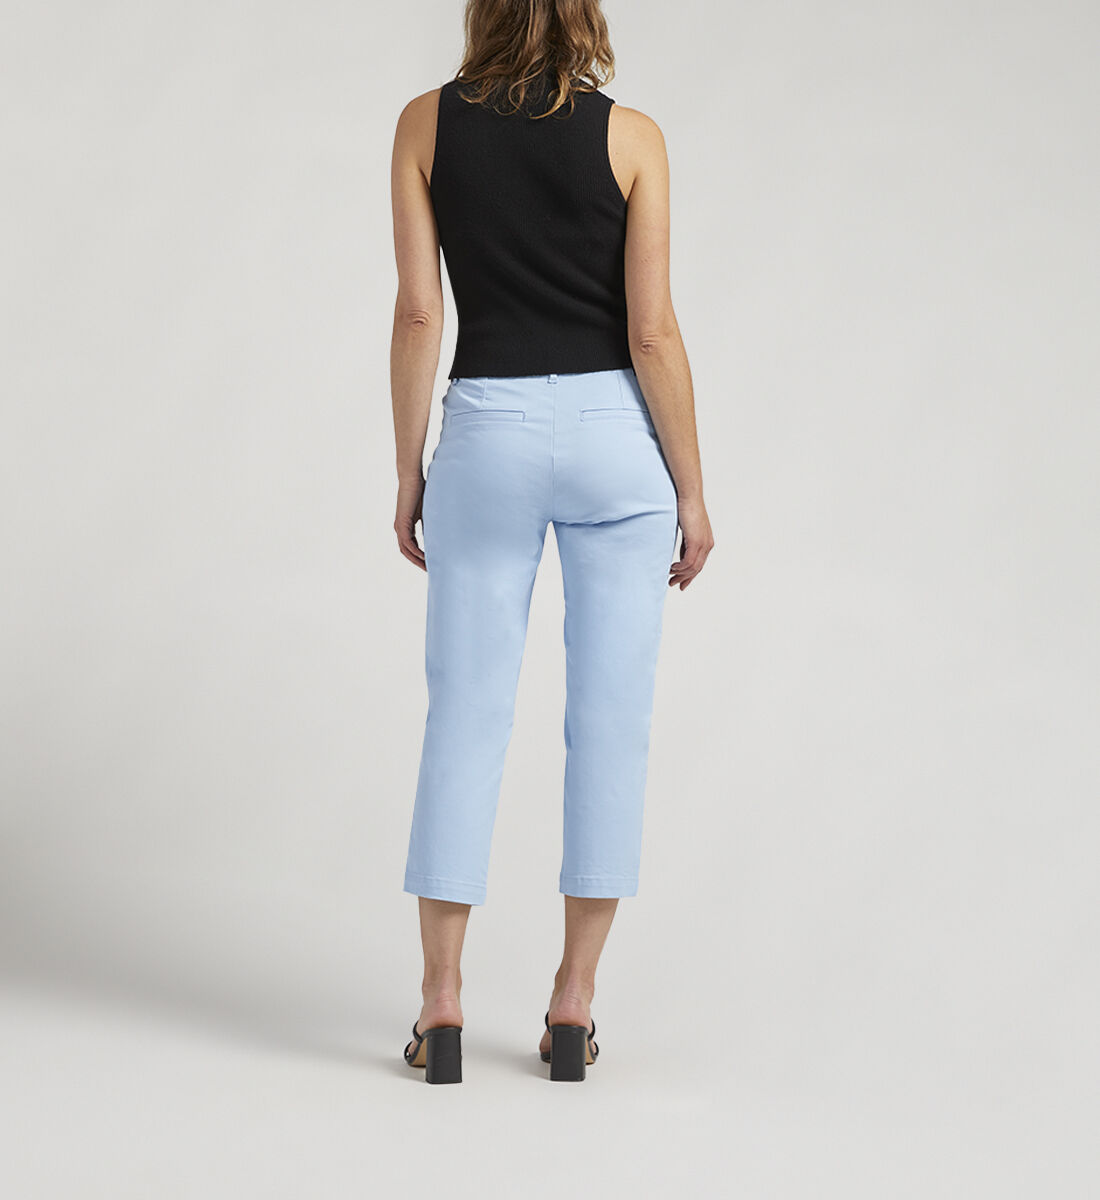 Buy Maddie Mid Rise Capri for USD 44.00 | Jag Jeans US New